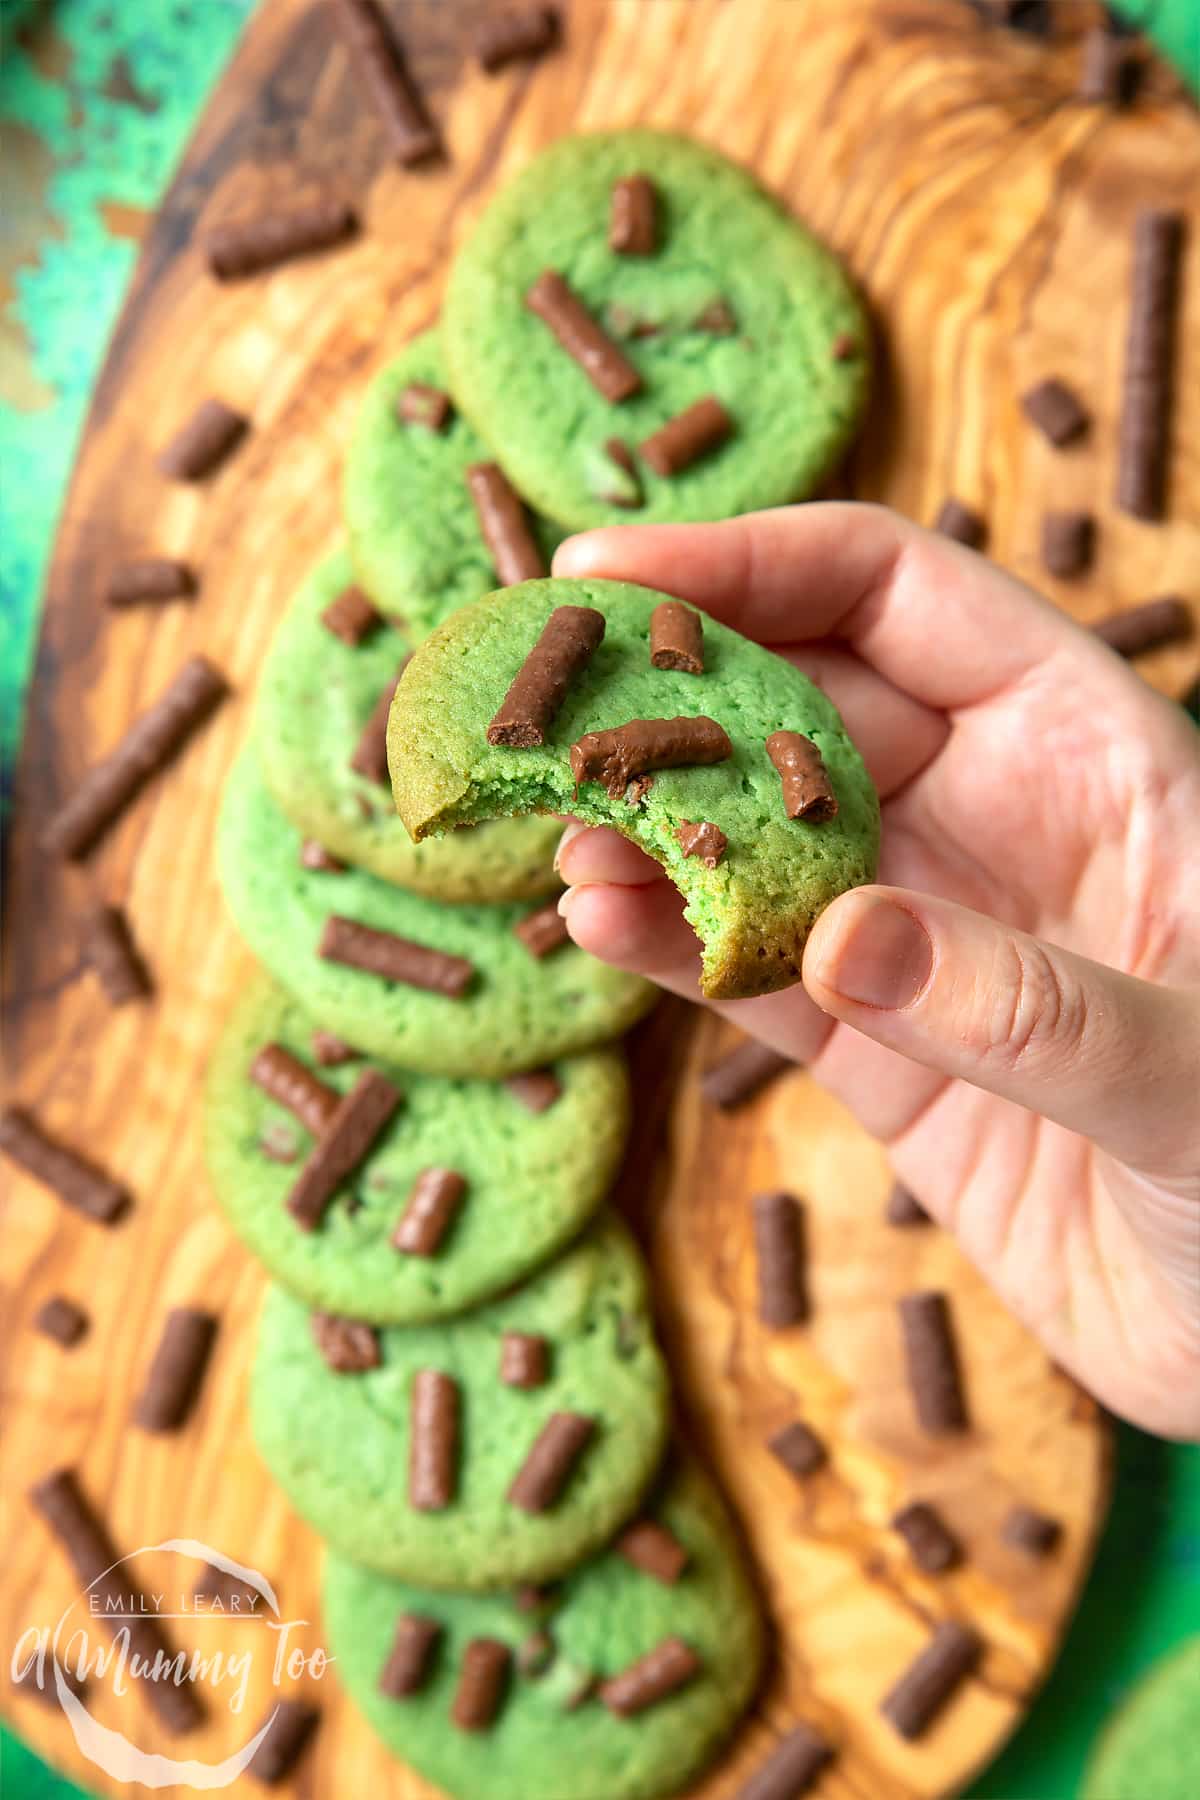 Hand holding a green cookie with a bite out of it. The cookie is topped with Matchmaker pieces. More Matchmaker cookies are arranged on a wooden board below.